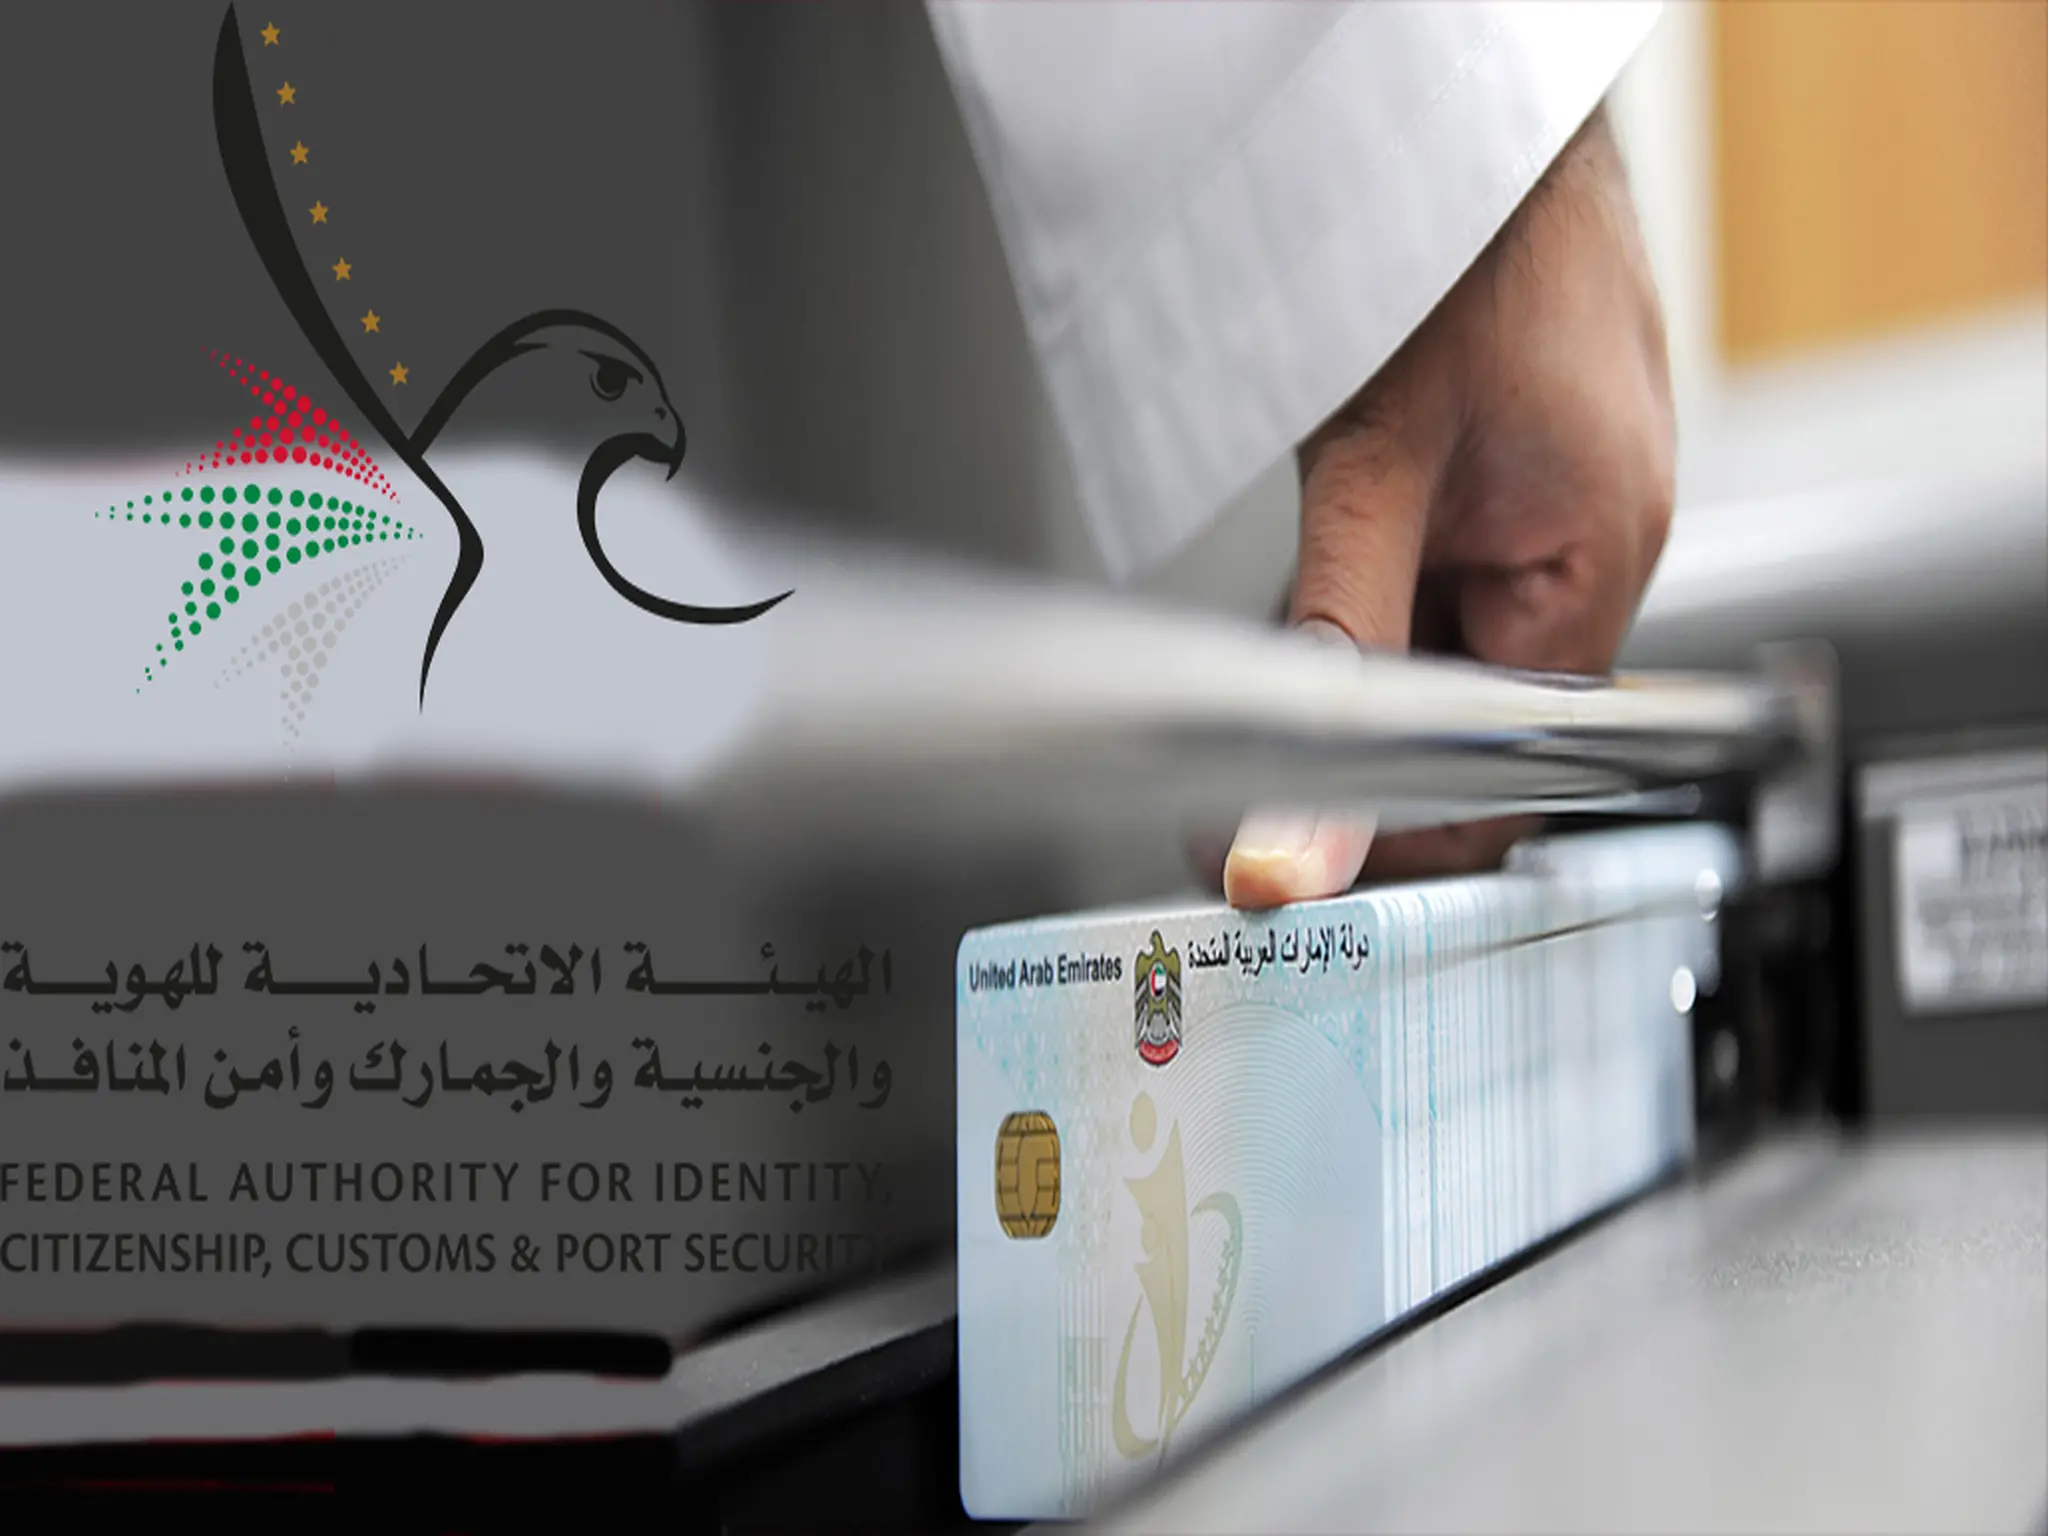 Urgent from (Identity and Nationality) regarding the renewal of the residence visa electronically